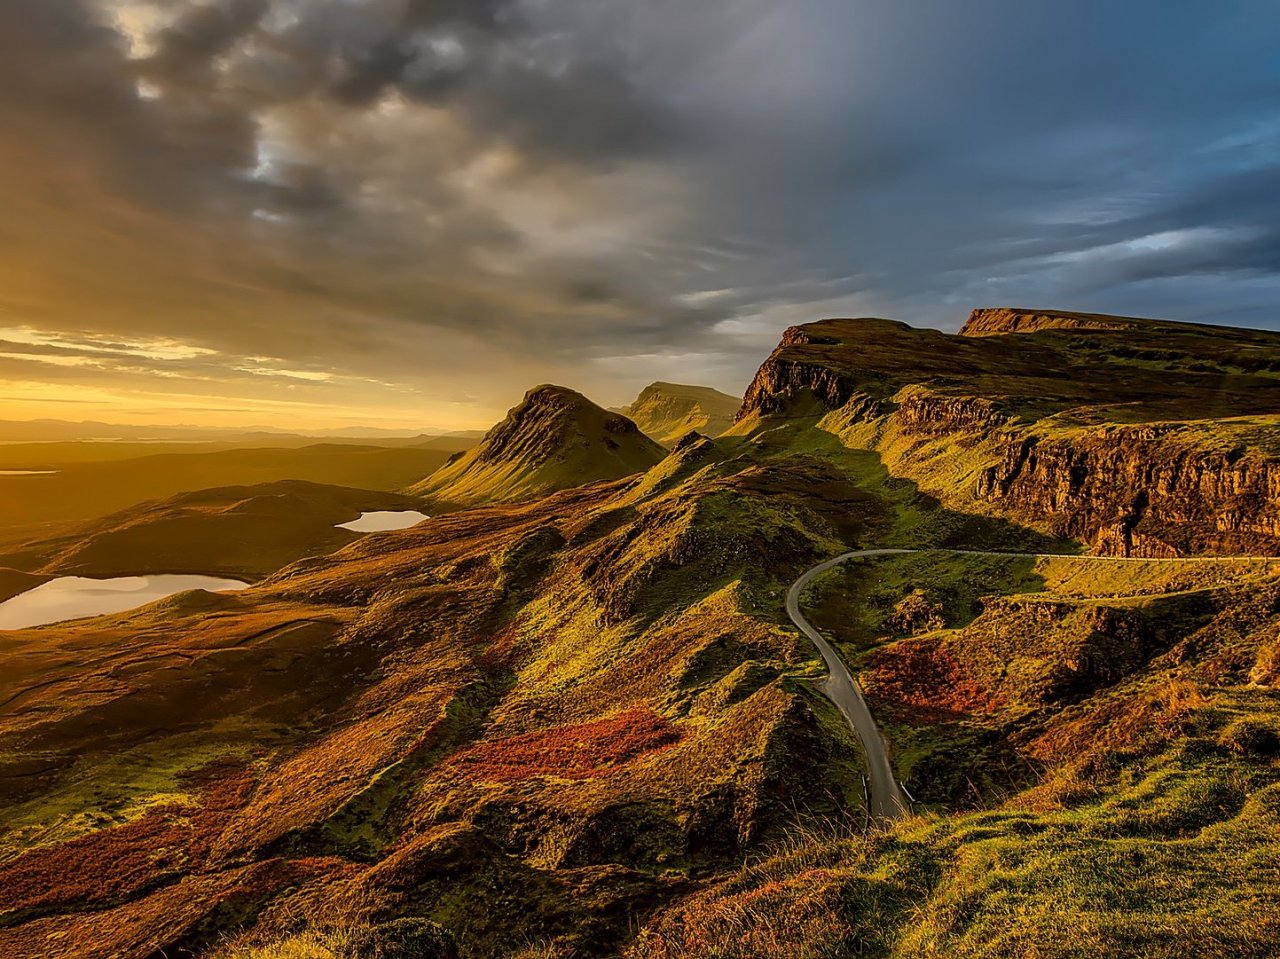 Mountains of Scotland jigsaw puzzle